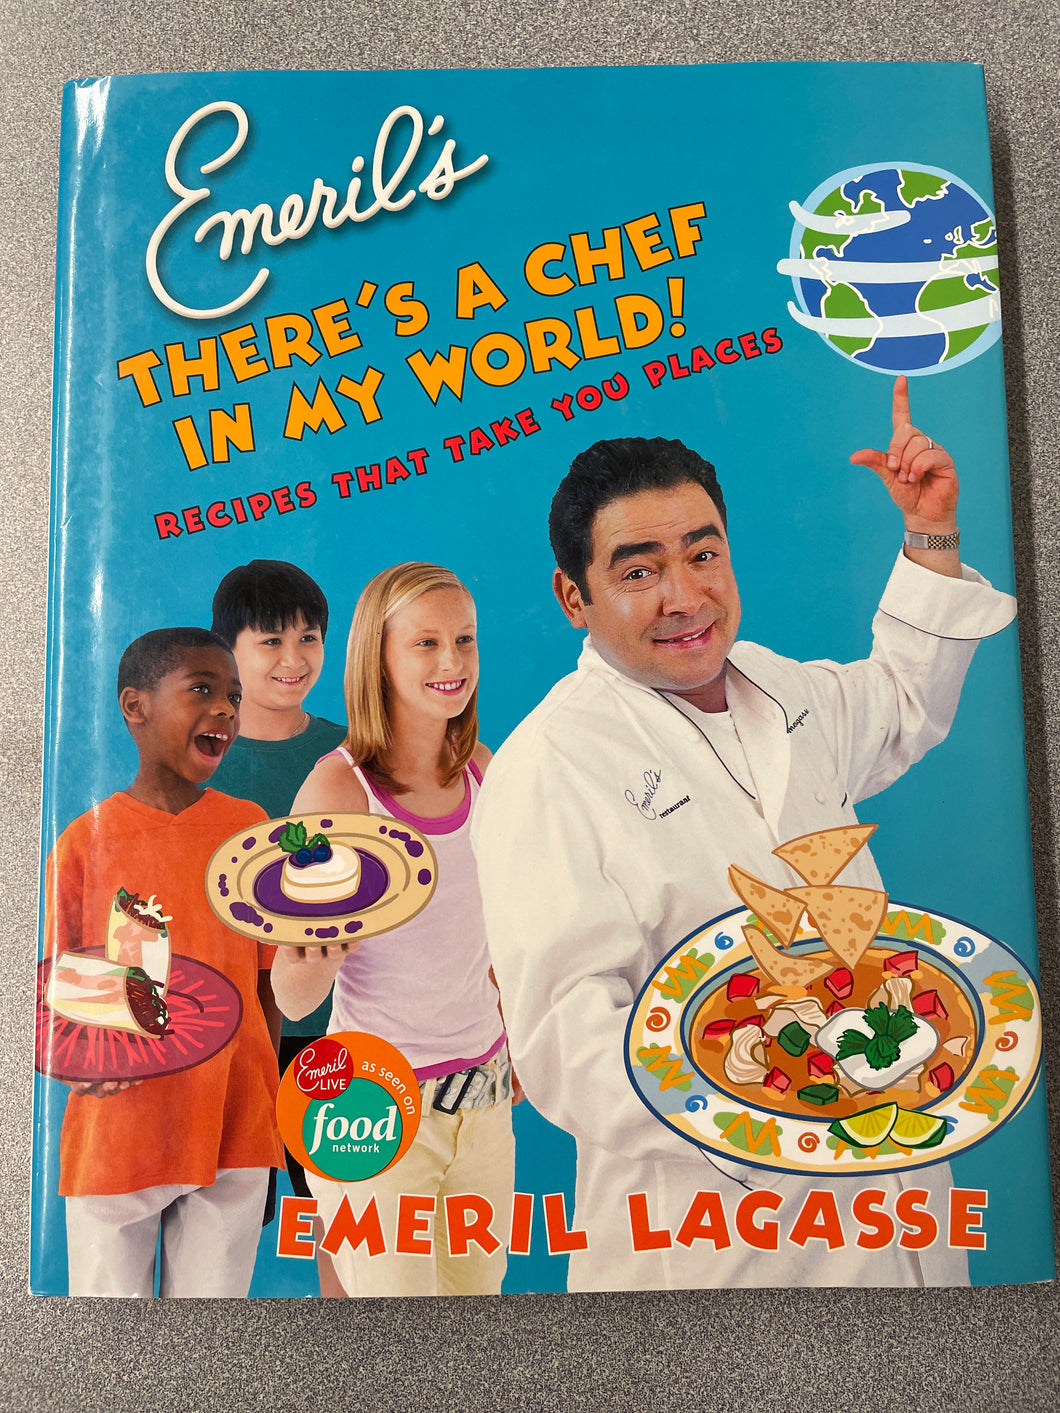 Emeril's There's a Chef in My World! Recipes That Take You Places, Lagasse, Emeril [2006] CN 12/23